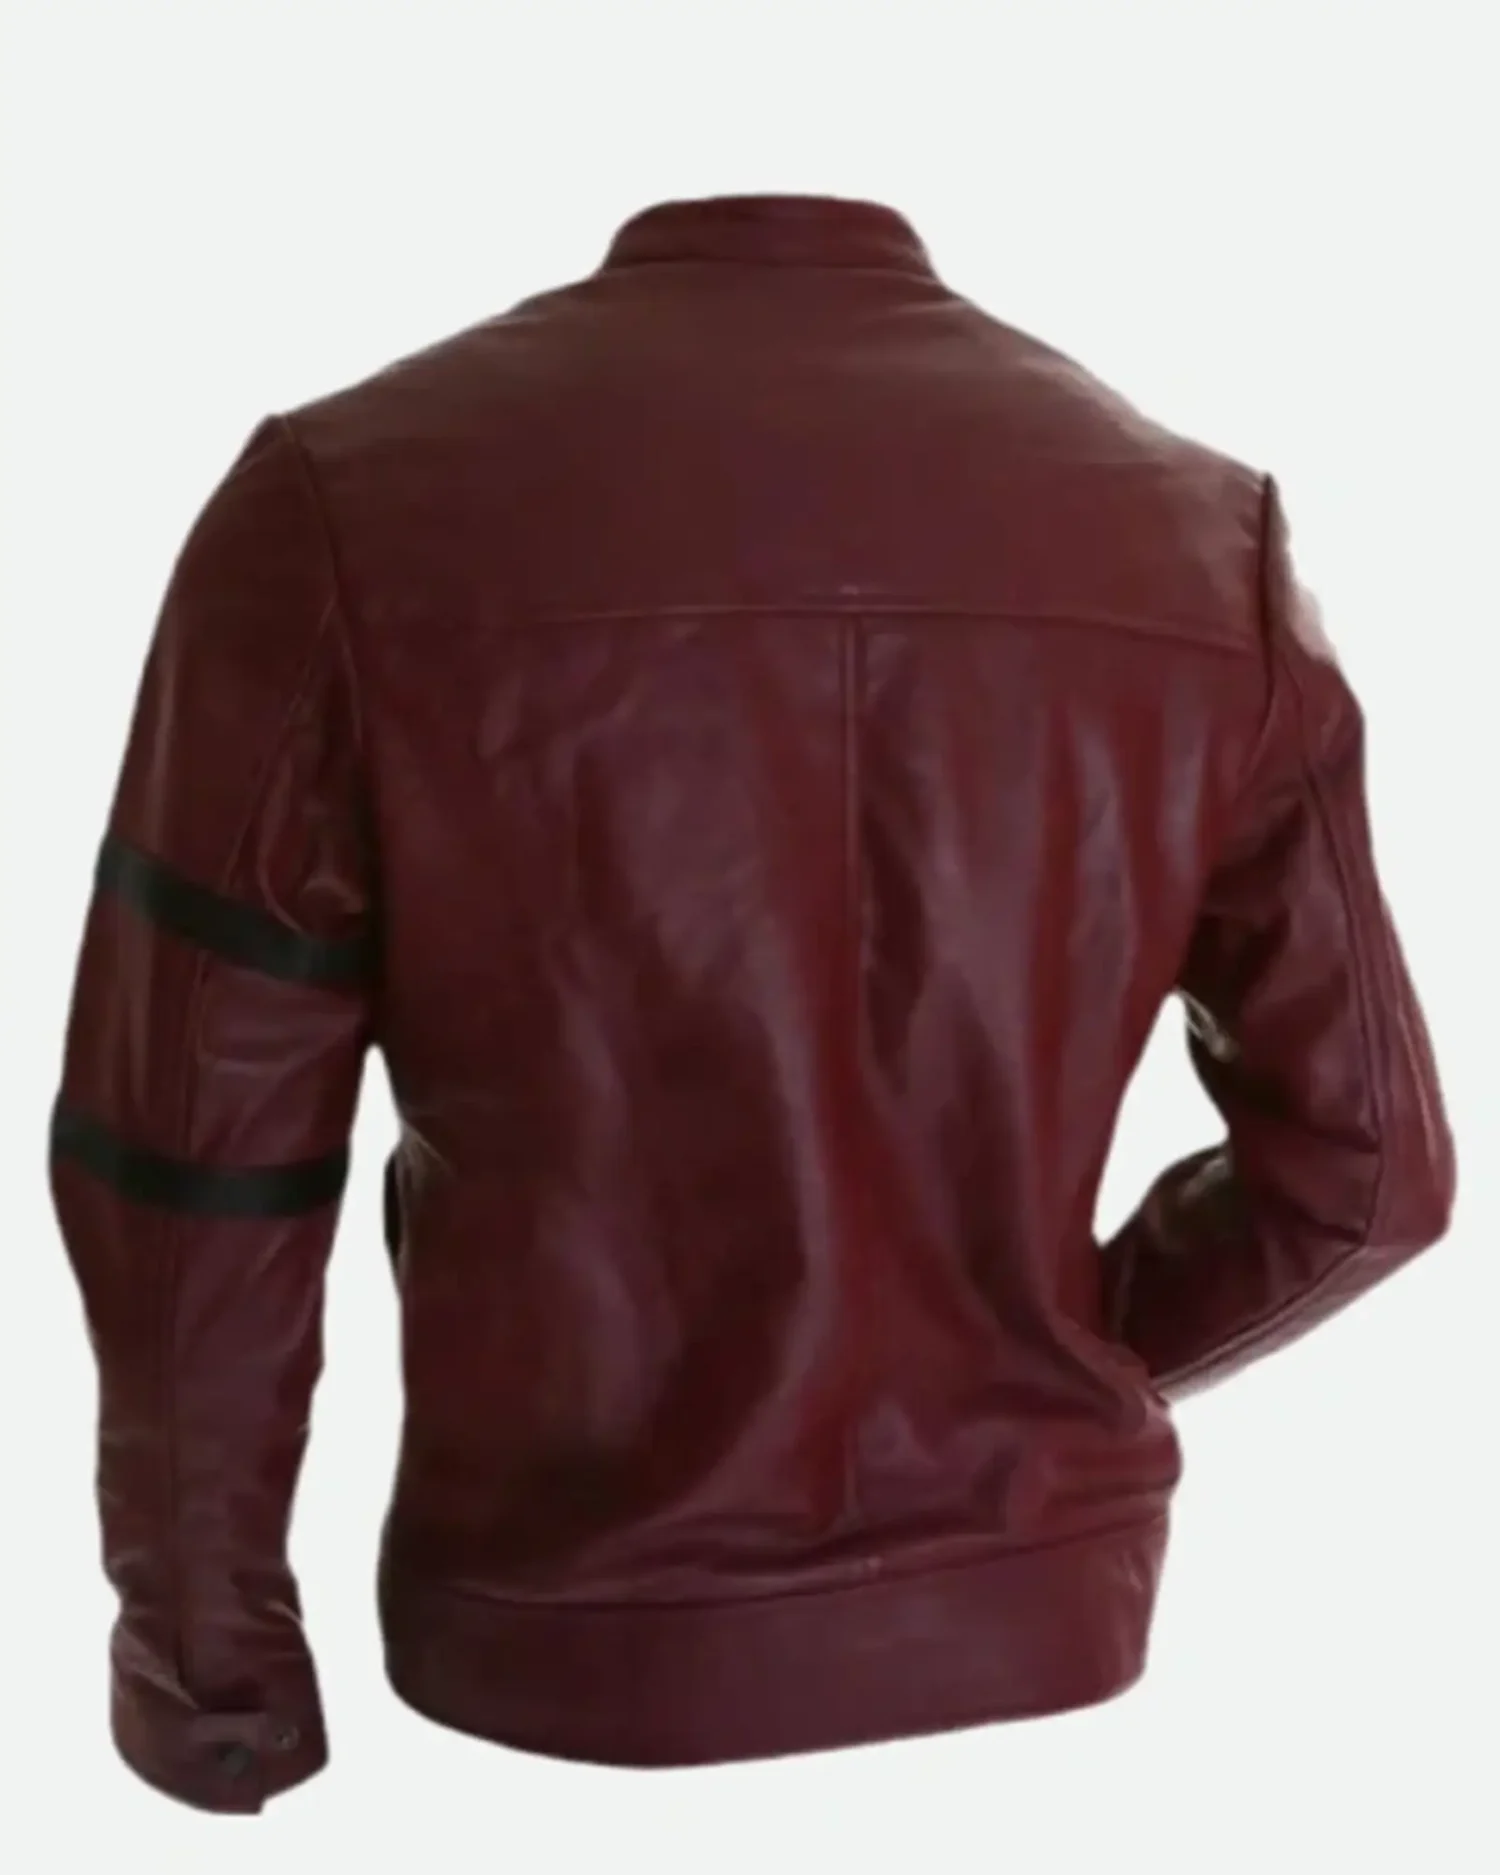 Vin Diesel Fast And Furious Red Leather Jacket4